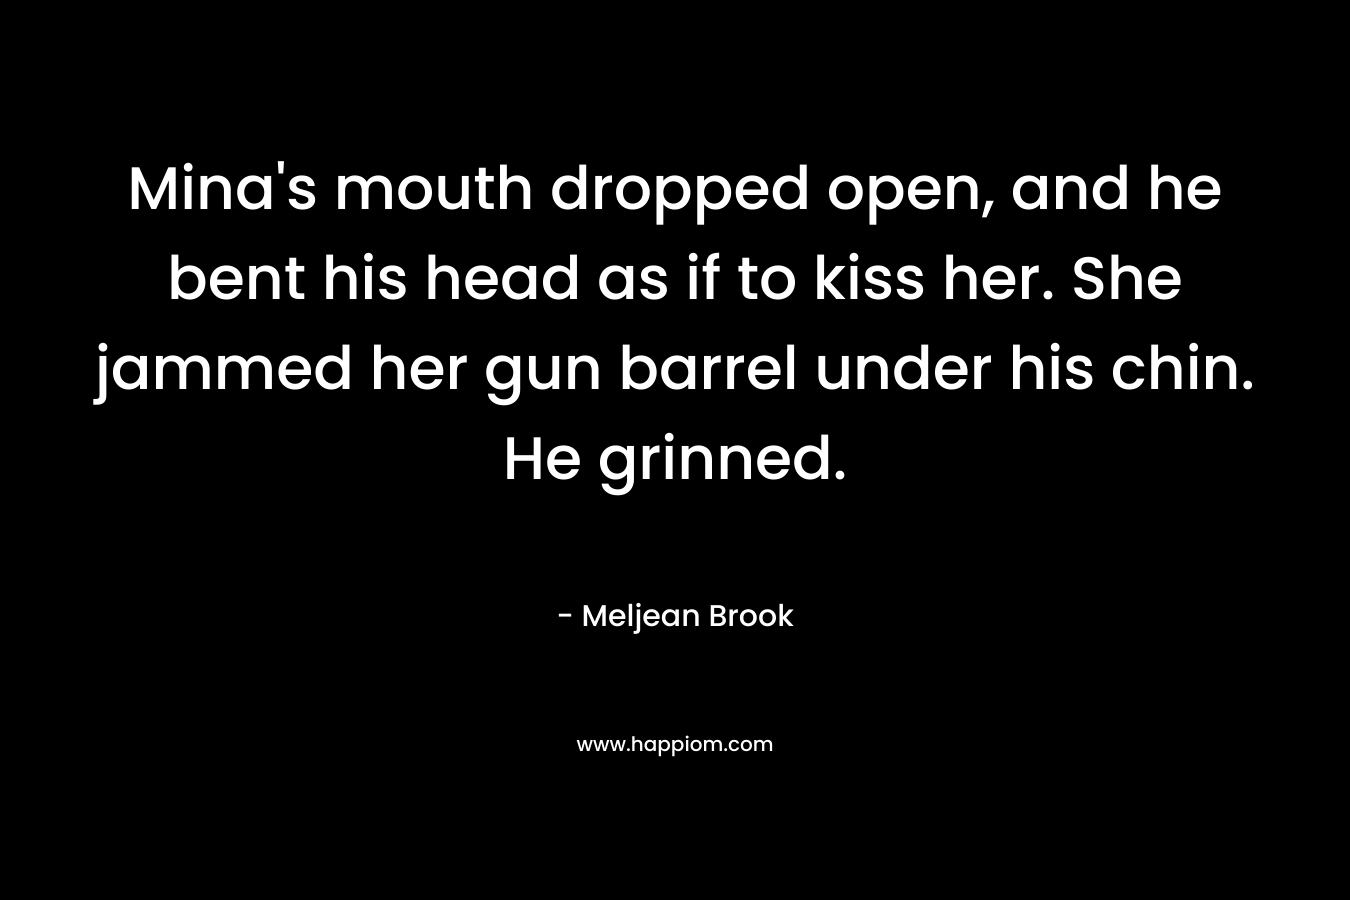 Mina’s mouth dropped open, and he bent his head as if to kiss her. She jammed her gun barrel under his chin. He grinned. – Meljean Brook